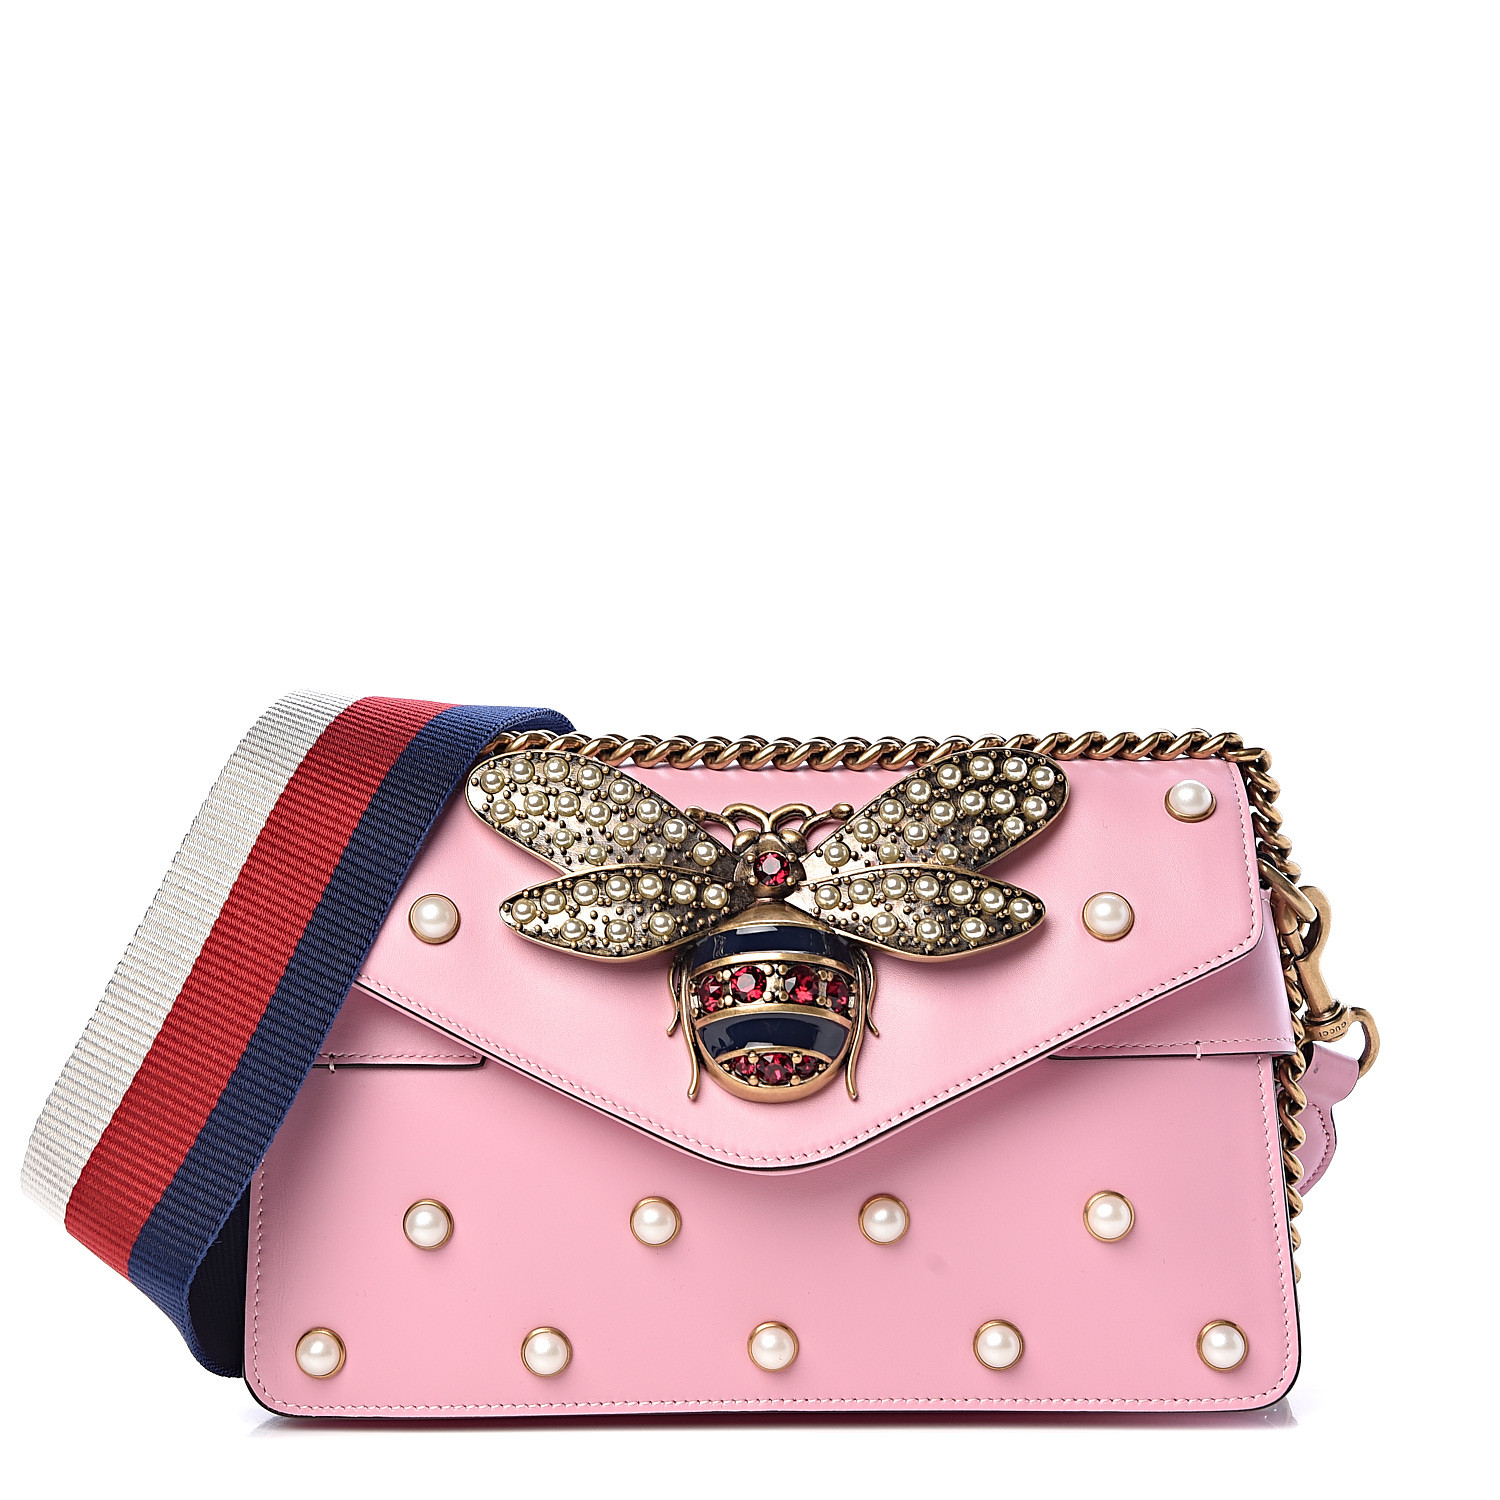 Gucci Purse With Bee And Pearls Perils | semashow.com